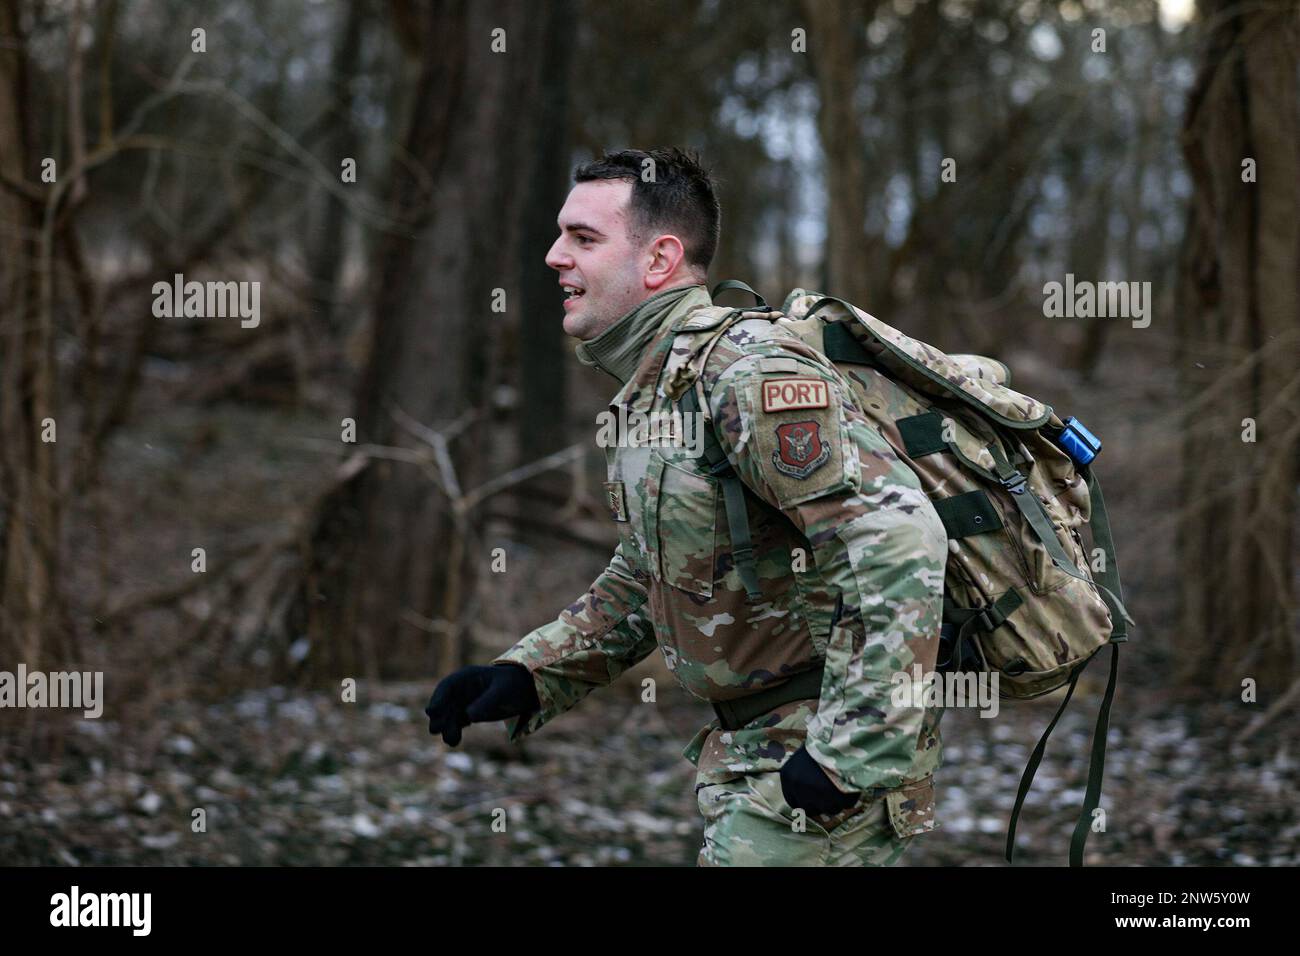 Tech. Sgt. Gabriel Clark, 87th Aerial Port Squadron ramp operations representative, pushes through a 12k ruck-march during the German Armed Forces Military Proficiency Badge qualification at Wright-Patterson Air Force Base, Ohio, Feb 3, 2023. He finished the event with a 1:37:50 runtime. The event started today and ends Friday. The German Armed Forces Team oversaw the event with participating members of the Air Force and AF Reserve. The badge, also known in German as Das Abzeichen fur Leistungen im Truppendienst, is awarded to and worn by German and allied forces. It requires Soldiers to demon Stock Photo